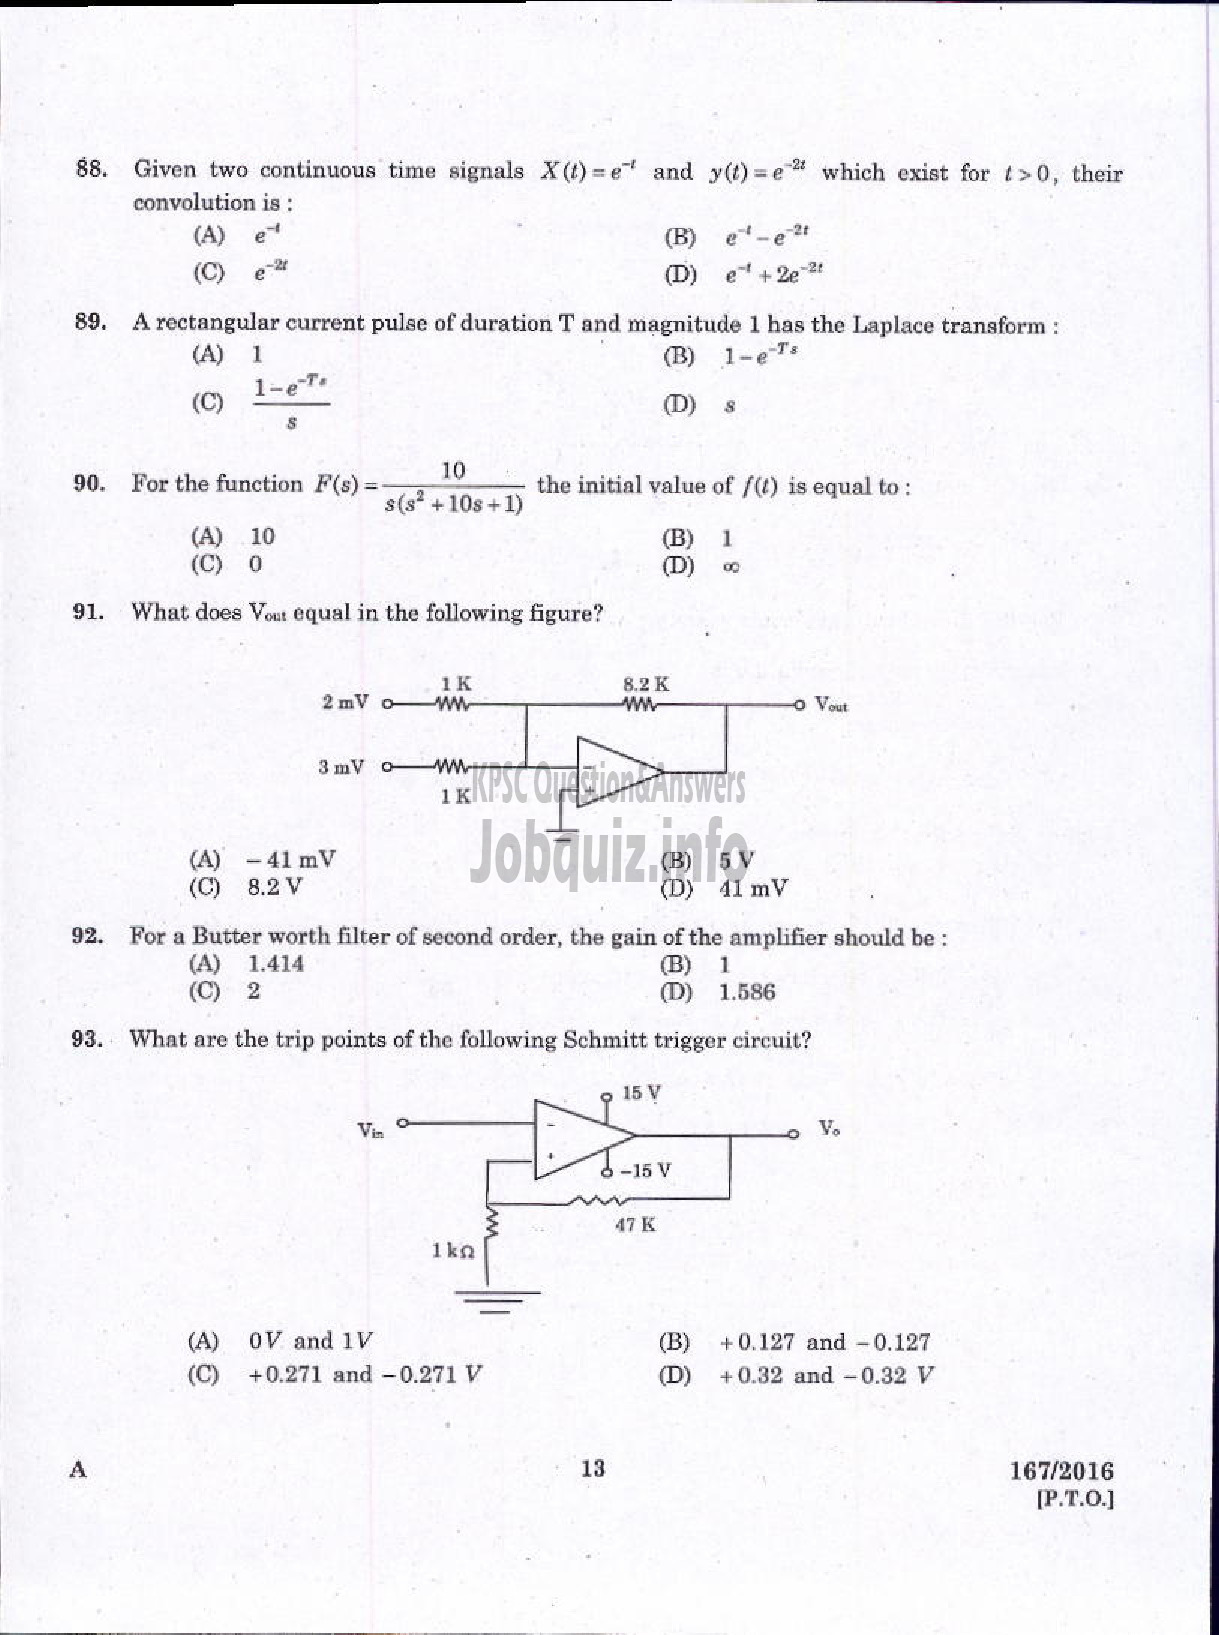 Kerala PSC Question Paper - LECTURER IN ELECTRICAL AND ELECTRONICS ENGINEERING GOVST POLYTECHNICS TECHNICAL EDUCATION-11